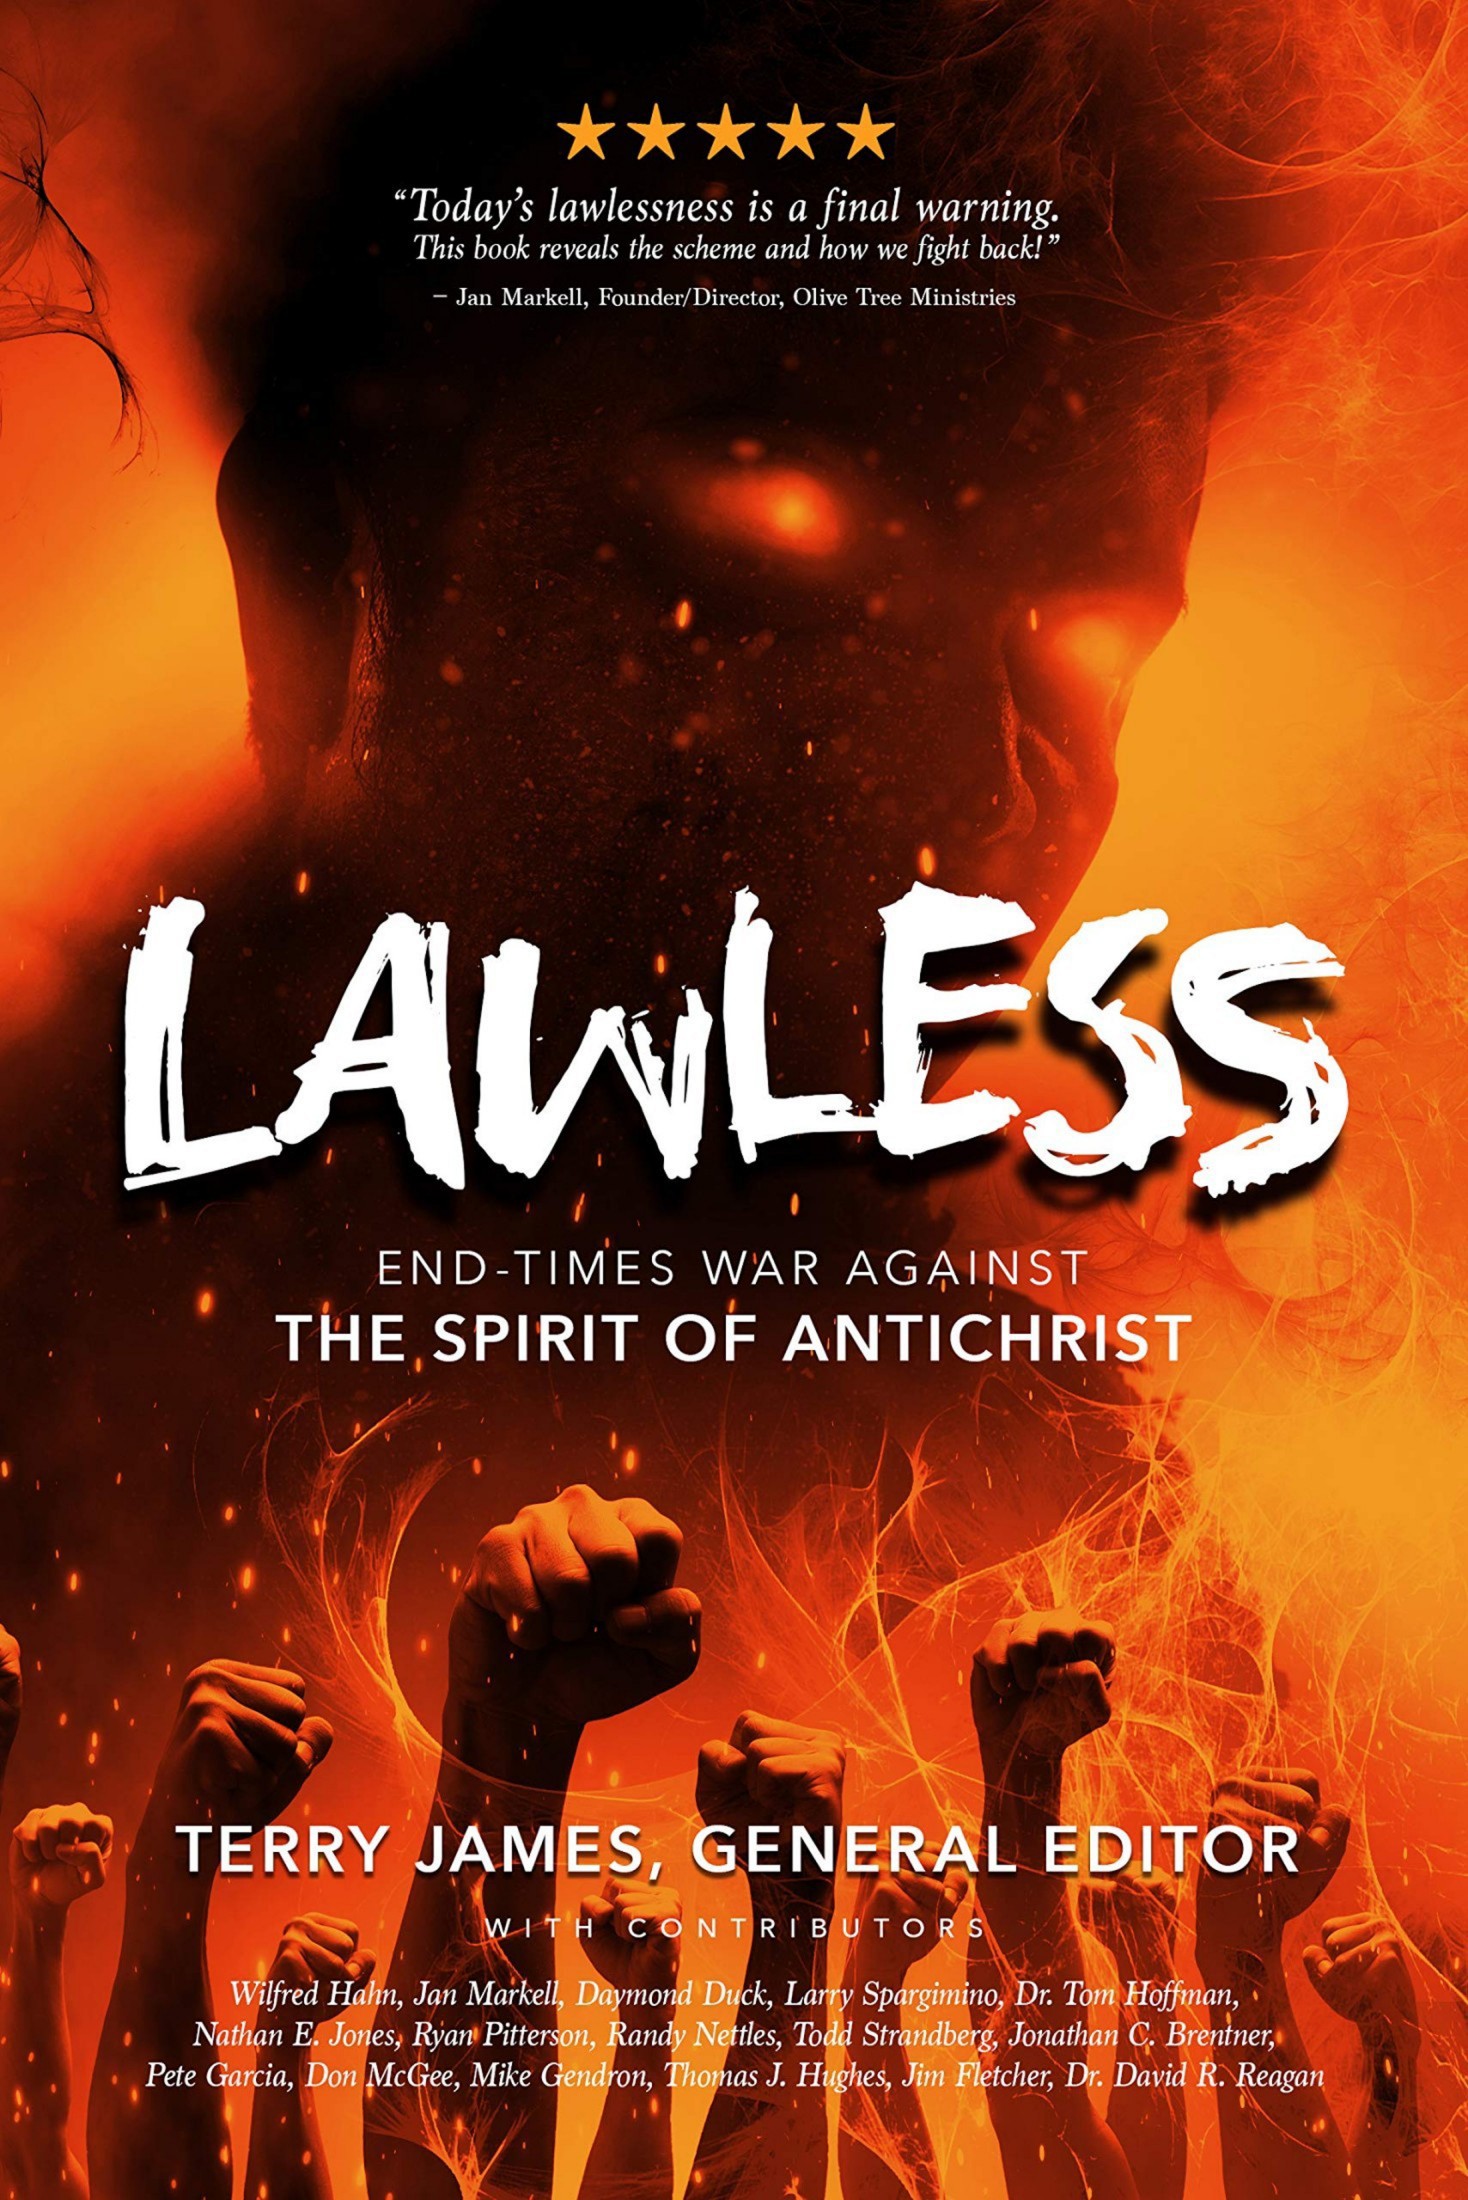 LAWLESS:End Times War Against the Spirit of Antichrist